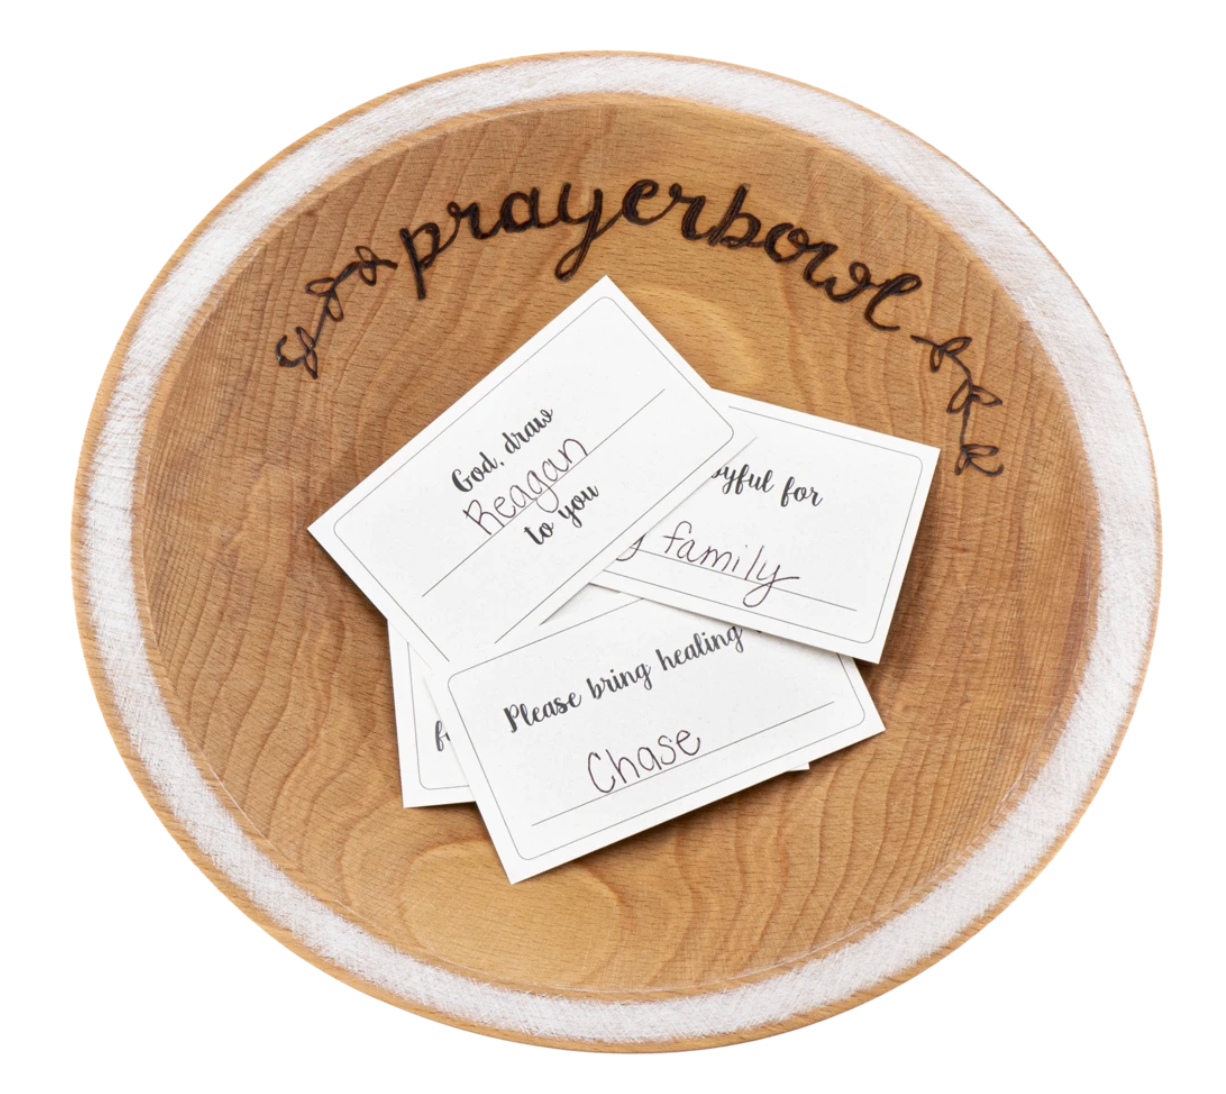 Pictured is the Grace Prayer Bowl. It is carved out of wood and has a natural finish. The lip of the bowl is wide and painted white. Carved into the bowl along one edge, in cursive, is the words "prayerbowl" and two flower designs on either side. Inside the bowl is a pile of prayer cards.